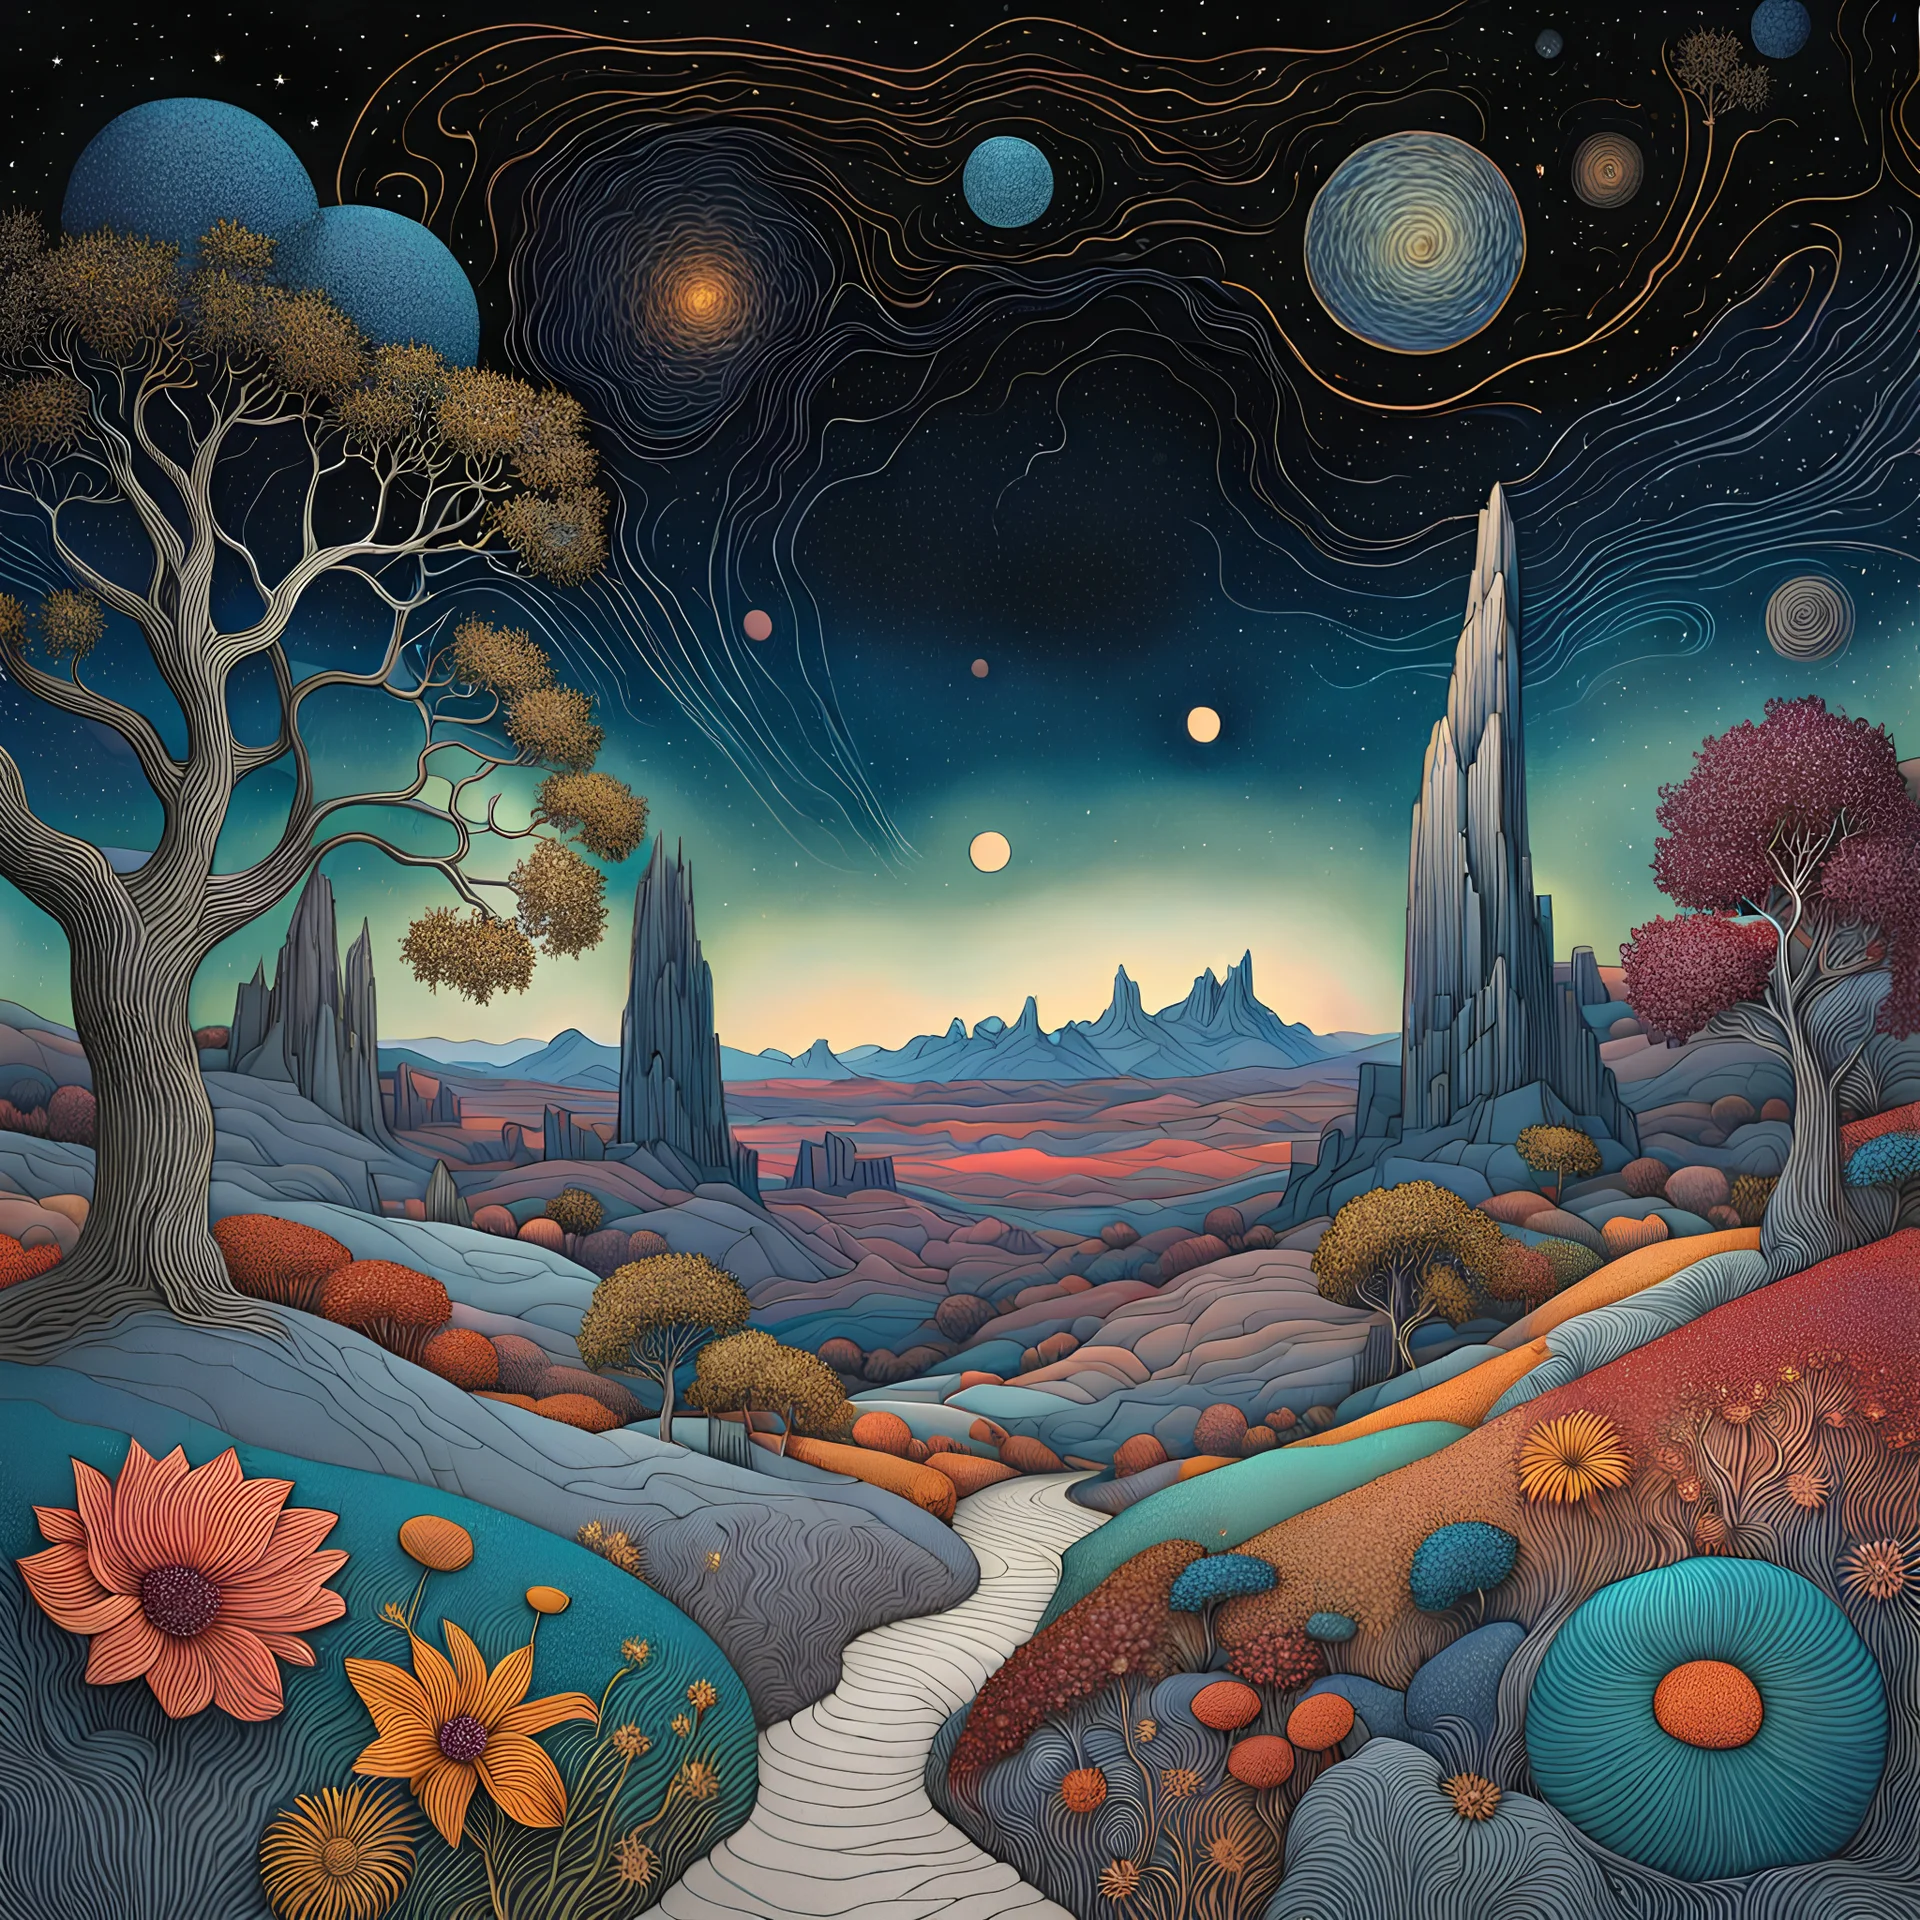 Colourful, peaceful, Max Ernst, night sky filled with galaxies and stars, rock formations, trees, flowers, one-line drawing, sharp focus, 8k, deep 3d field, intricate, ornate, hypermaximalist